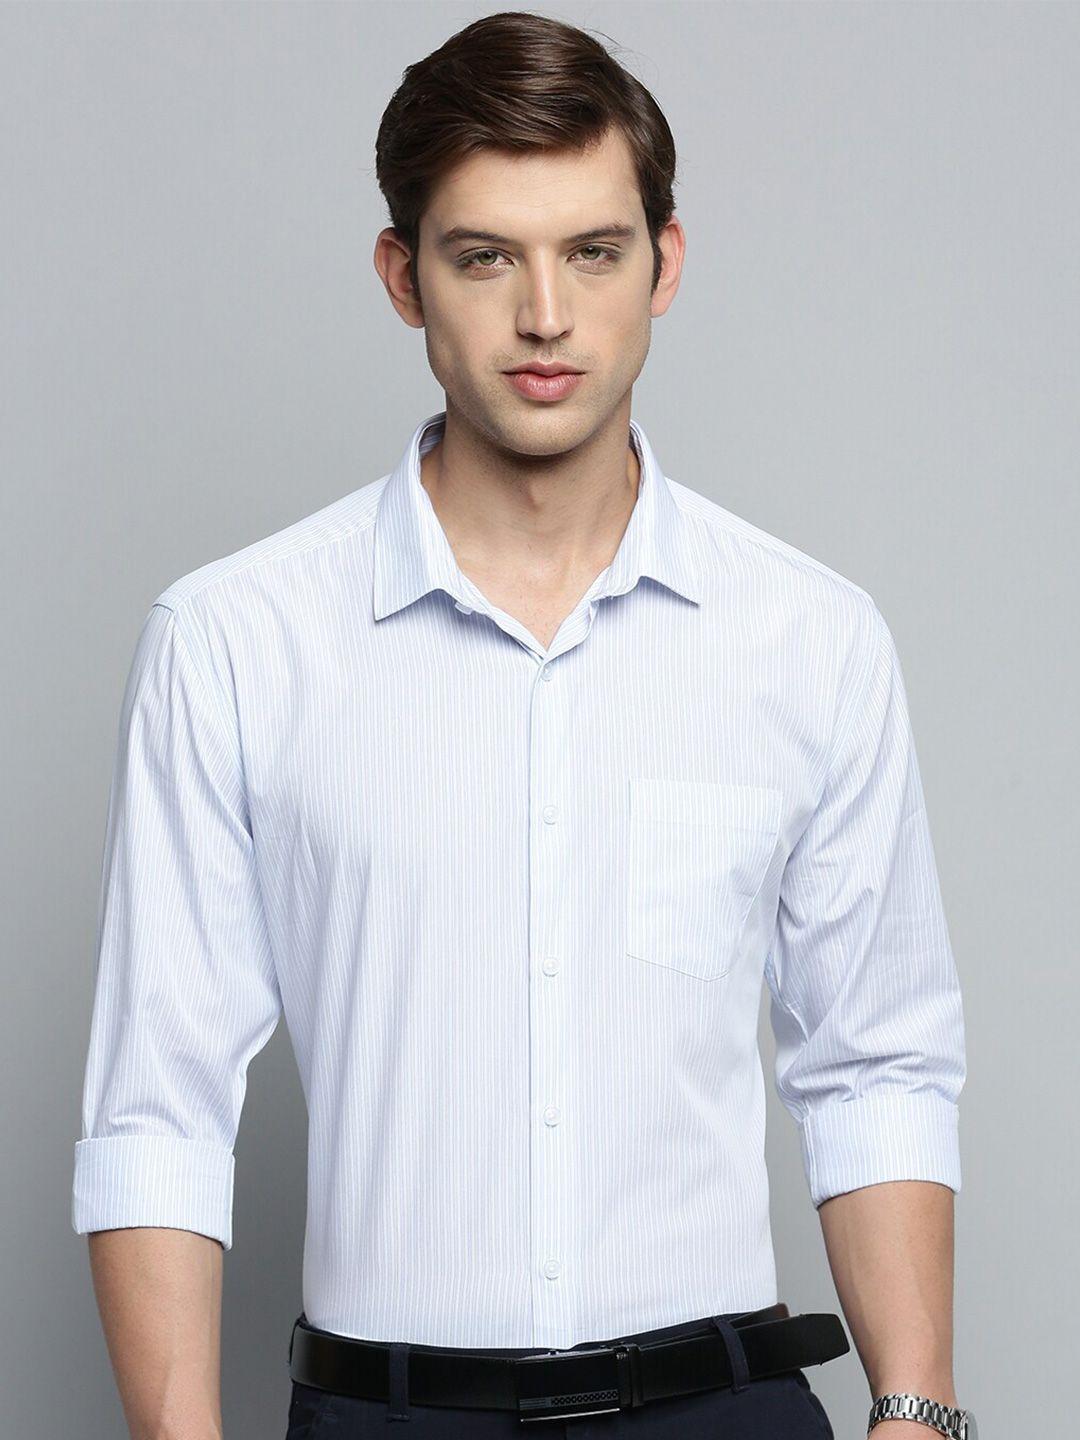 showoff classic vertical striped formal cotton shirt